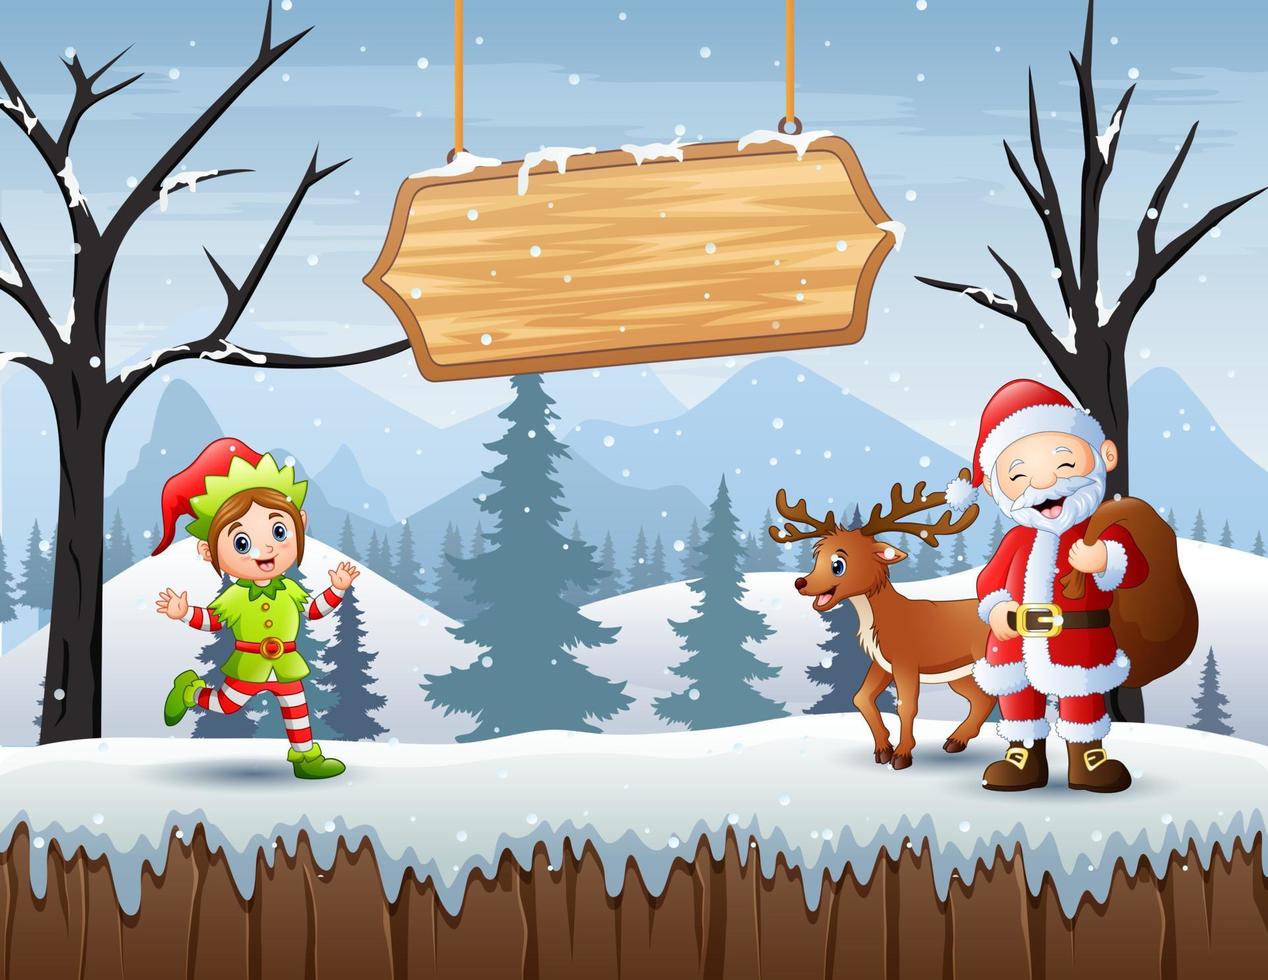 Merry Christmas with Santa and elf in winter landscape vector